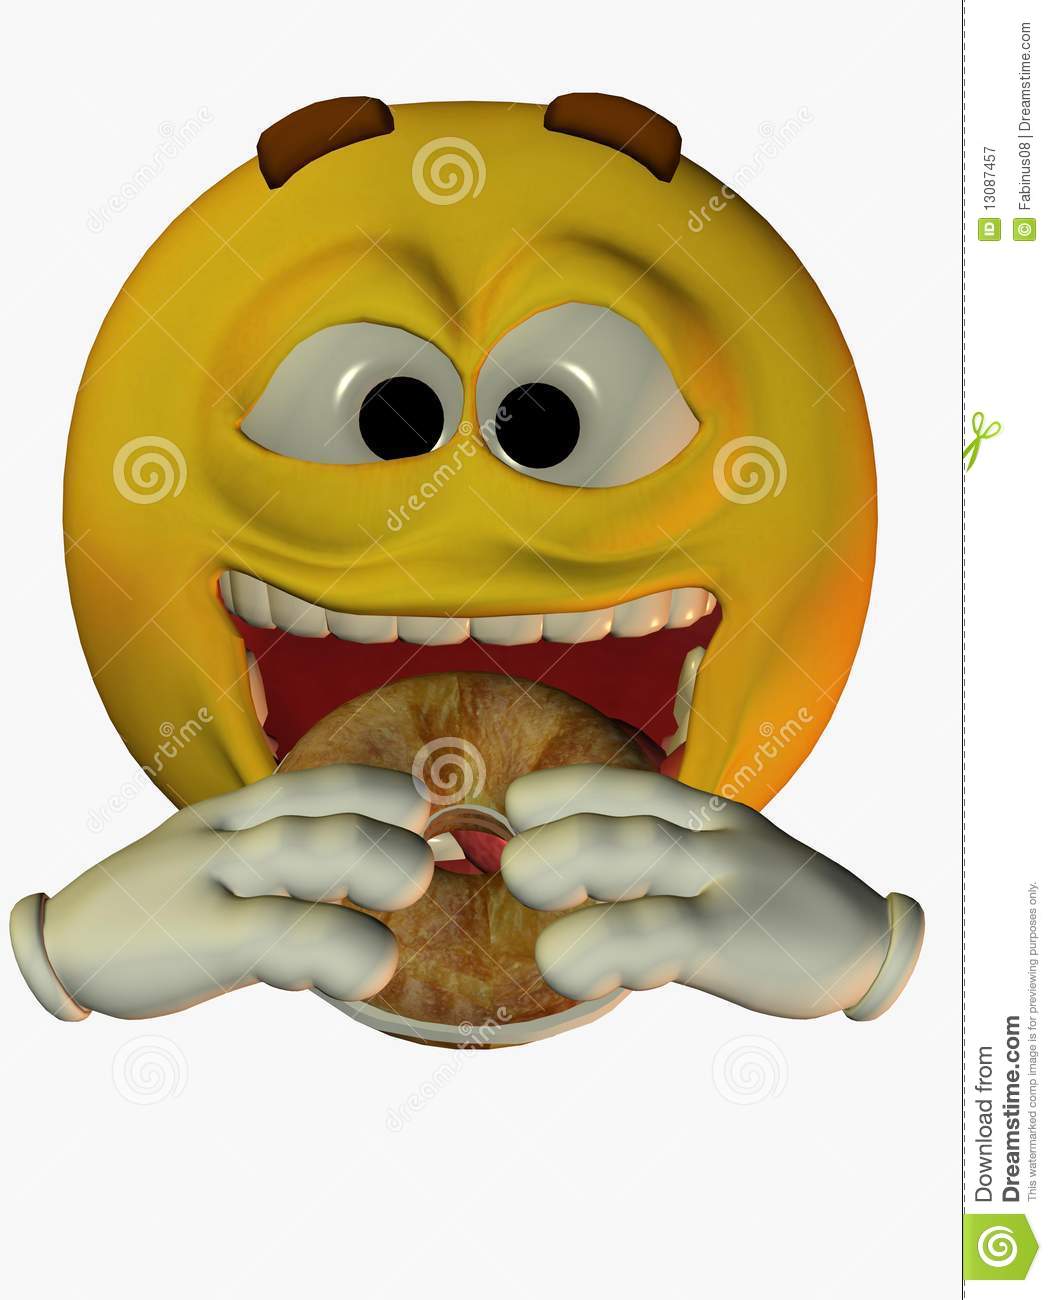 Smiley Face Eating Bagel Royalty Free Stock Photography   Image